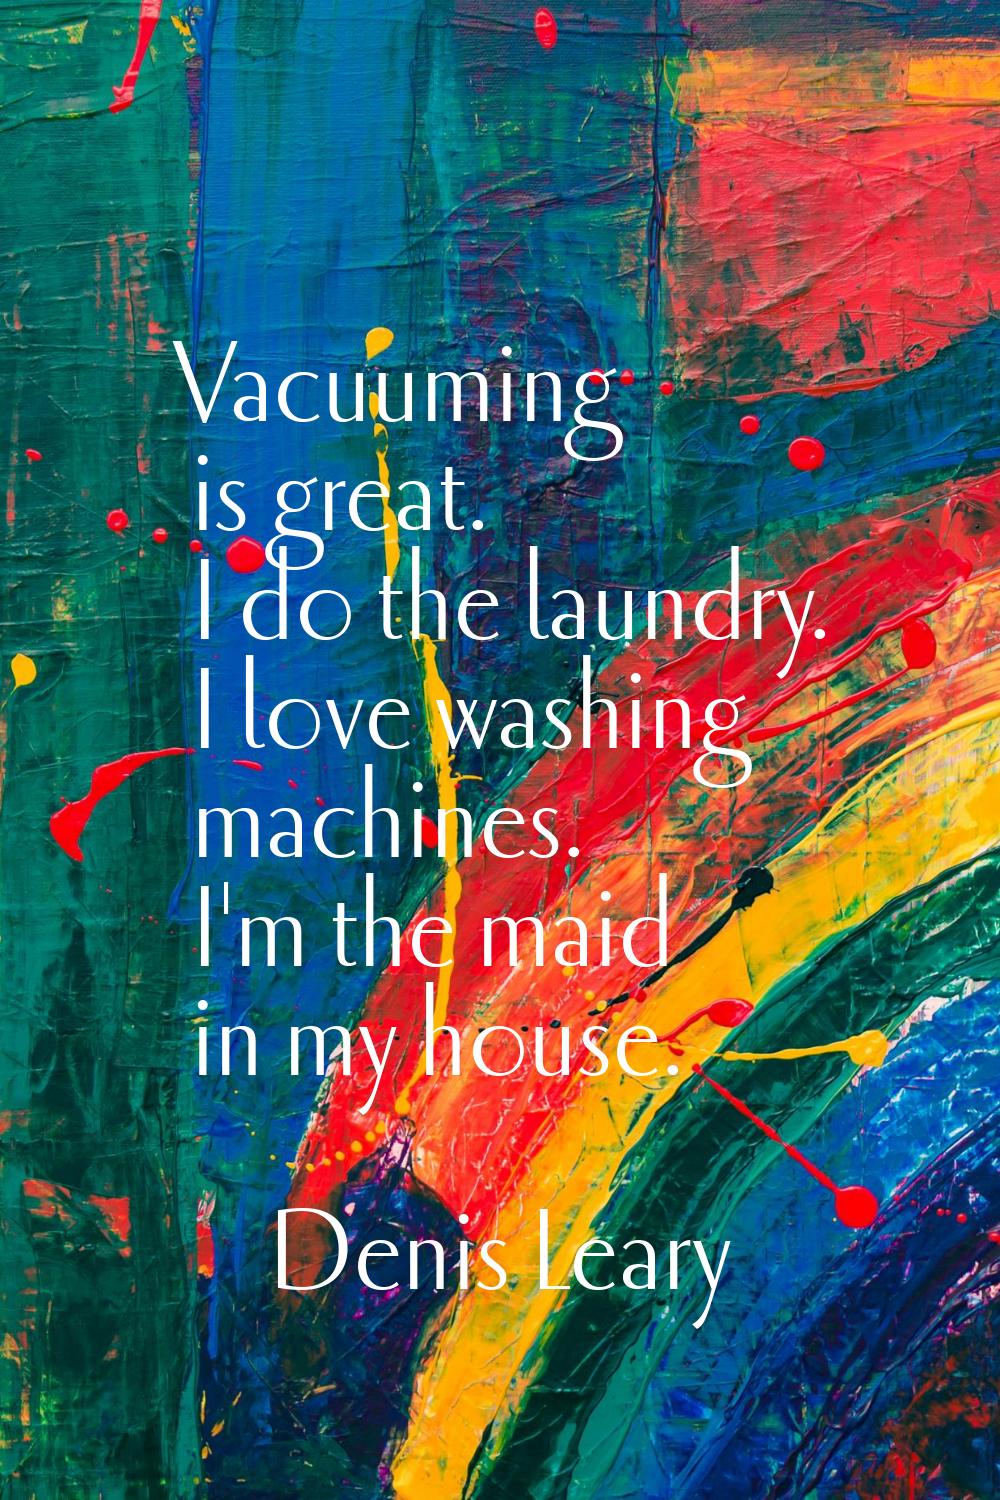 Vacuuming is great. I do the laundry. I love washing machines. I'm the maid in my house.